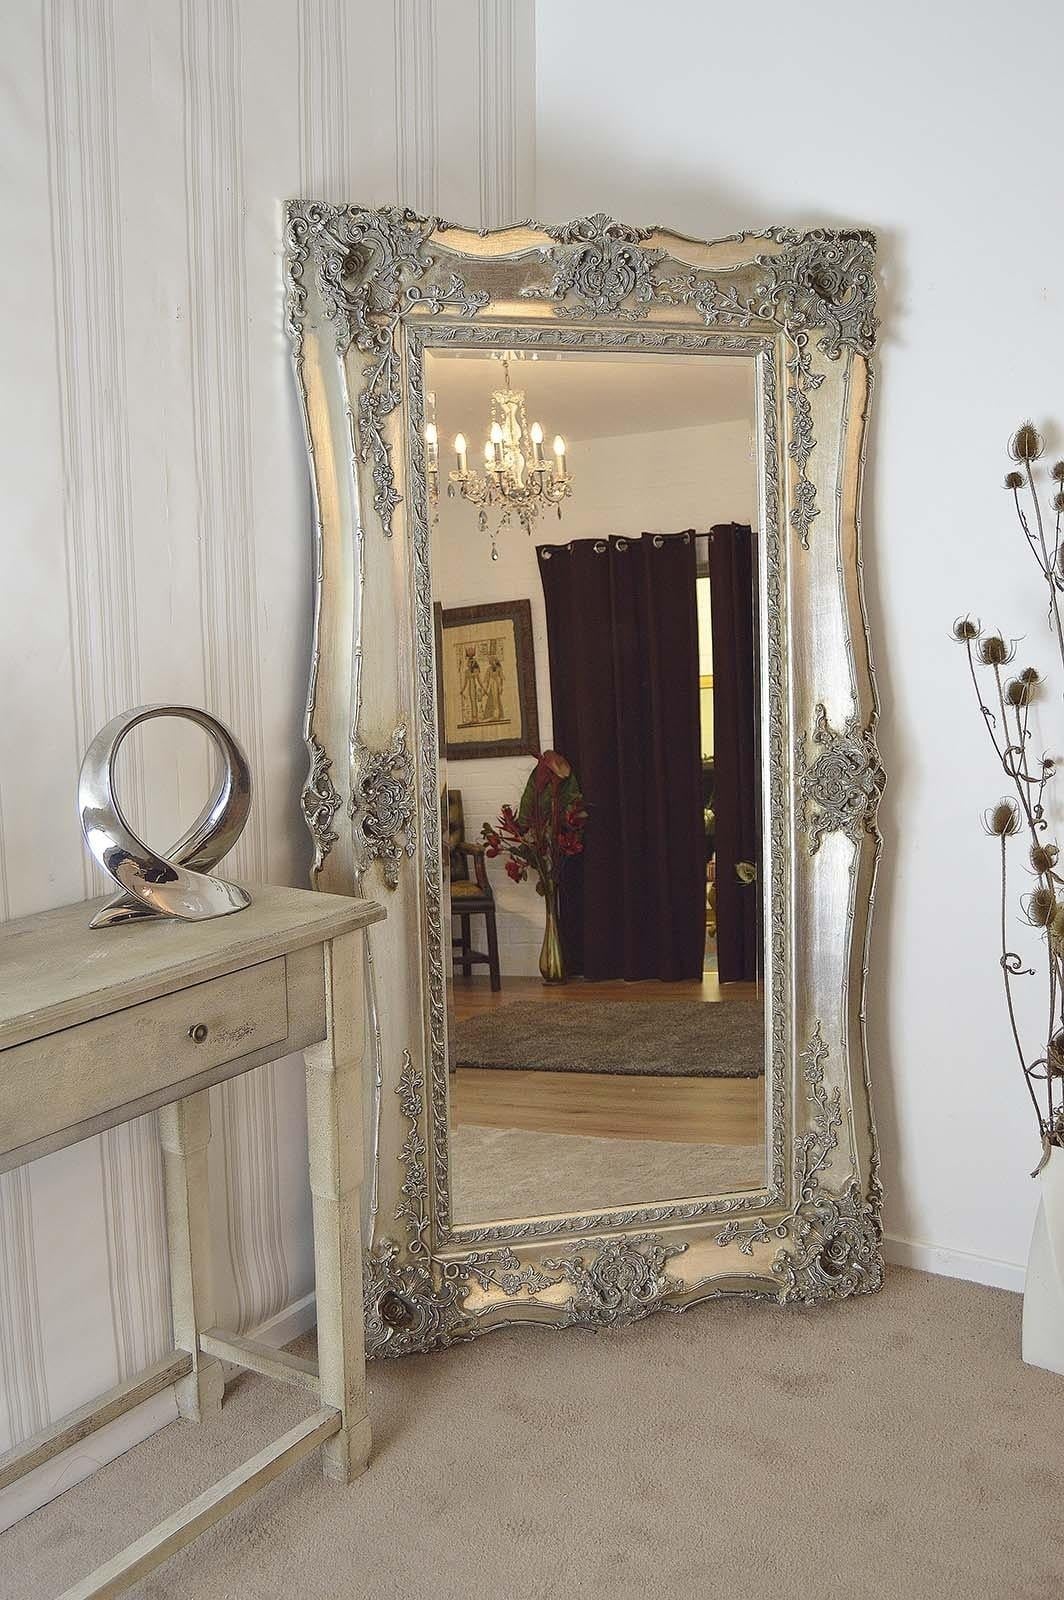 Large Antique Wall Mirror Ornate Frame Antique Ornate Wall Mirrors with regard to Big Antique Mirrors